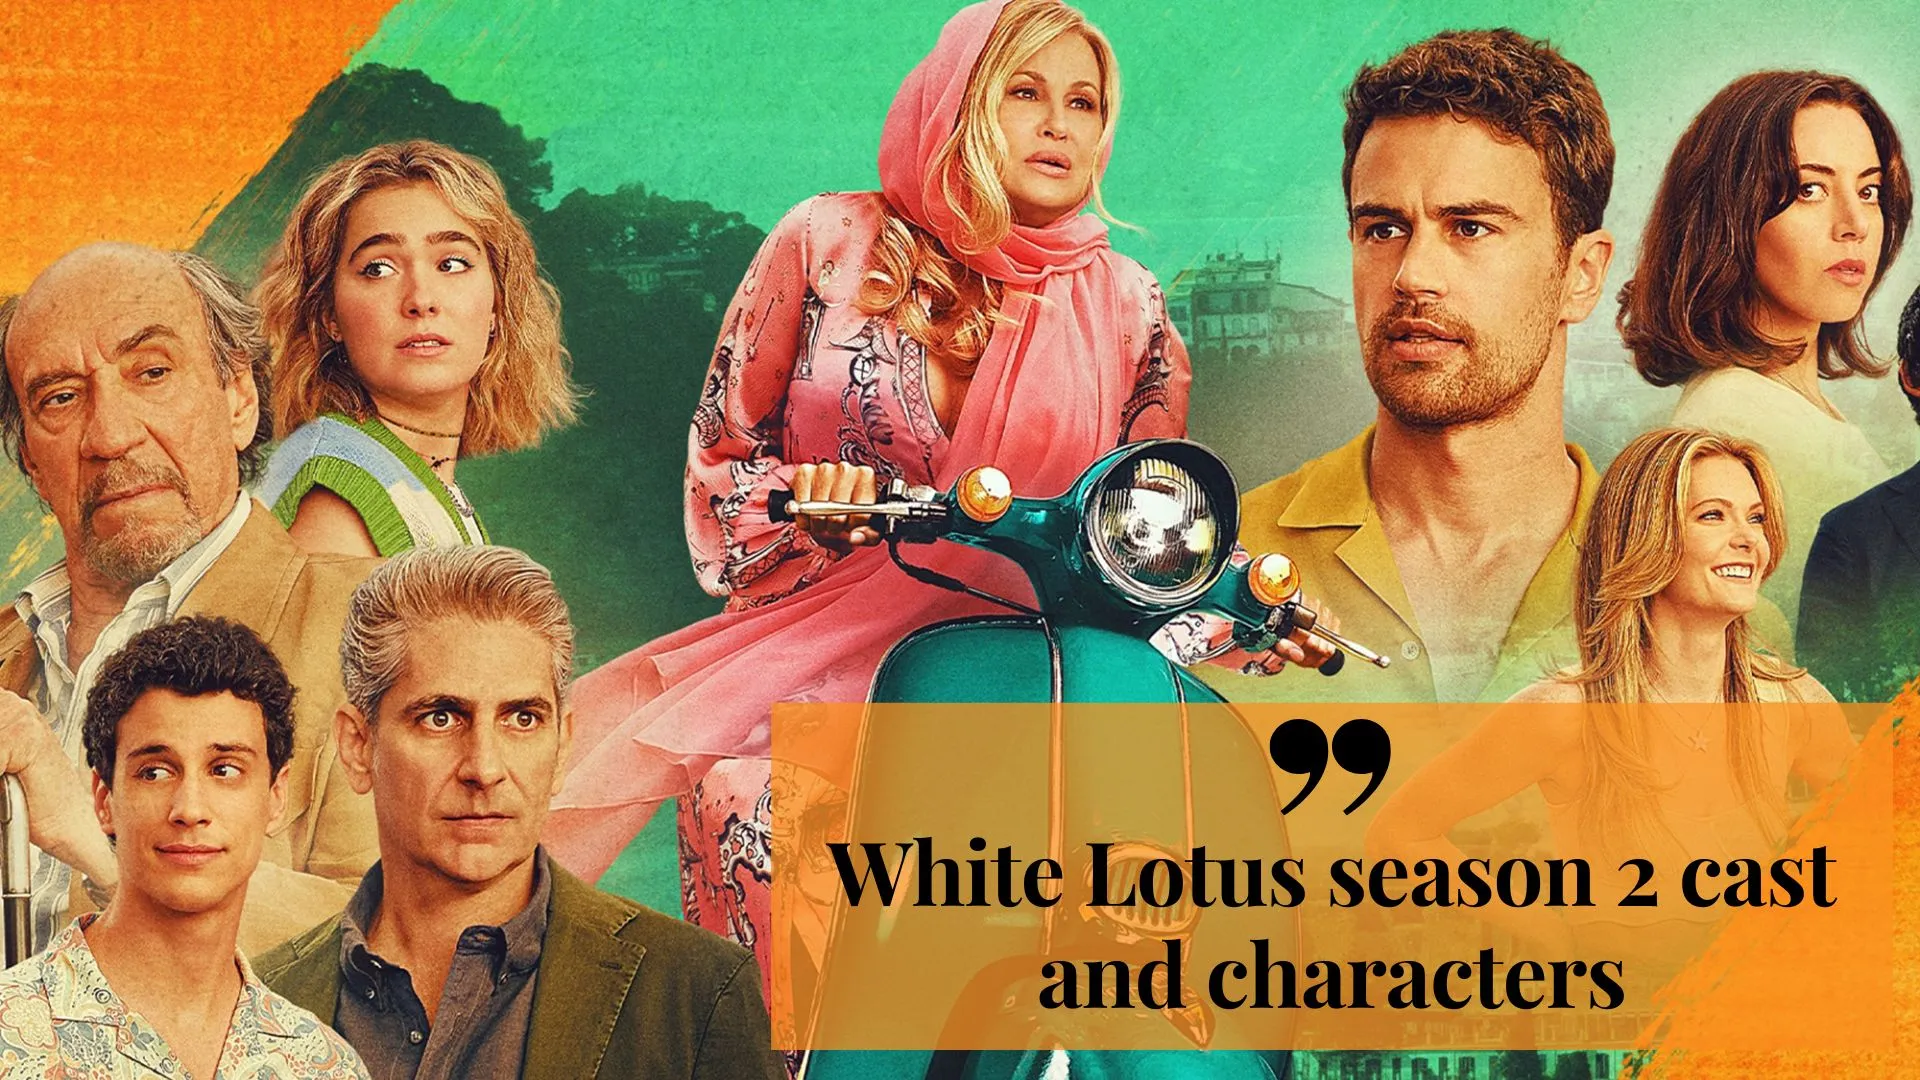 White Lotus season 2 cast and characters (Image credit: ew)